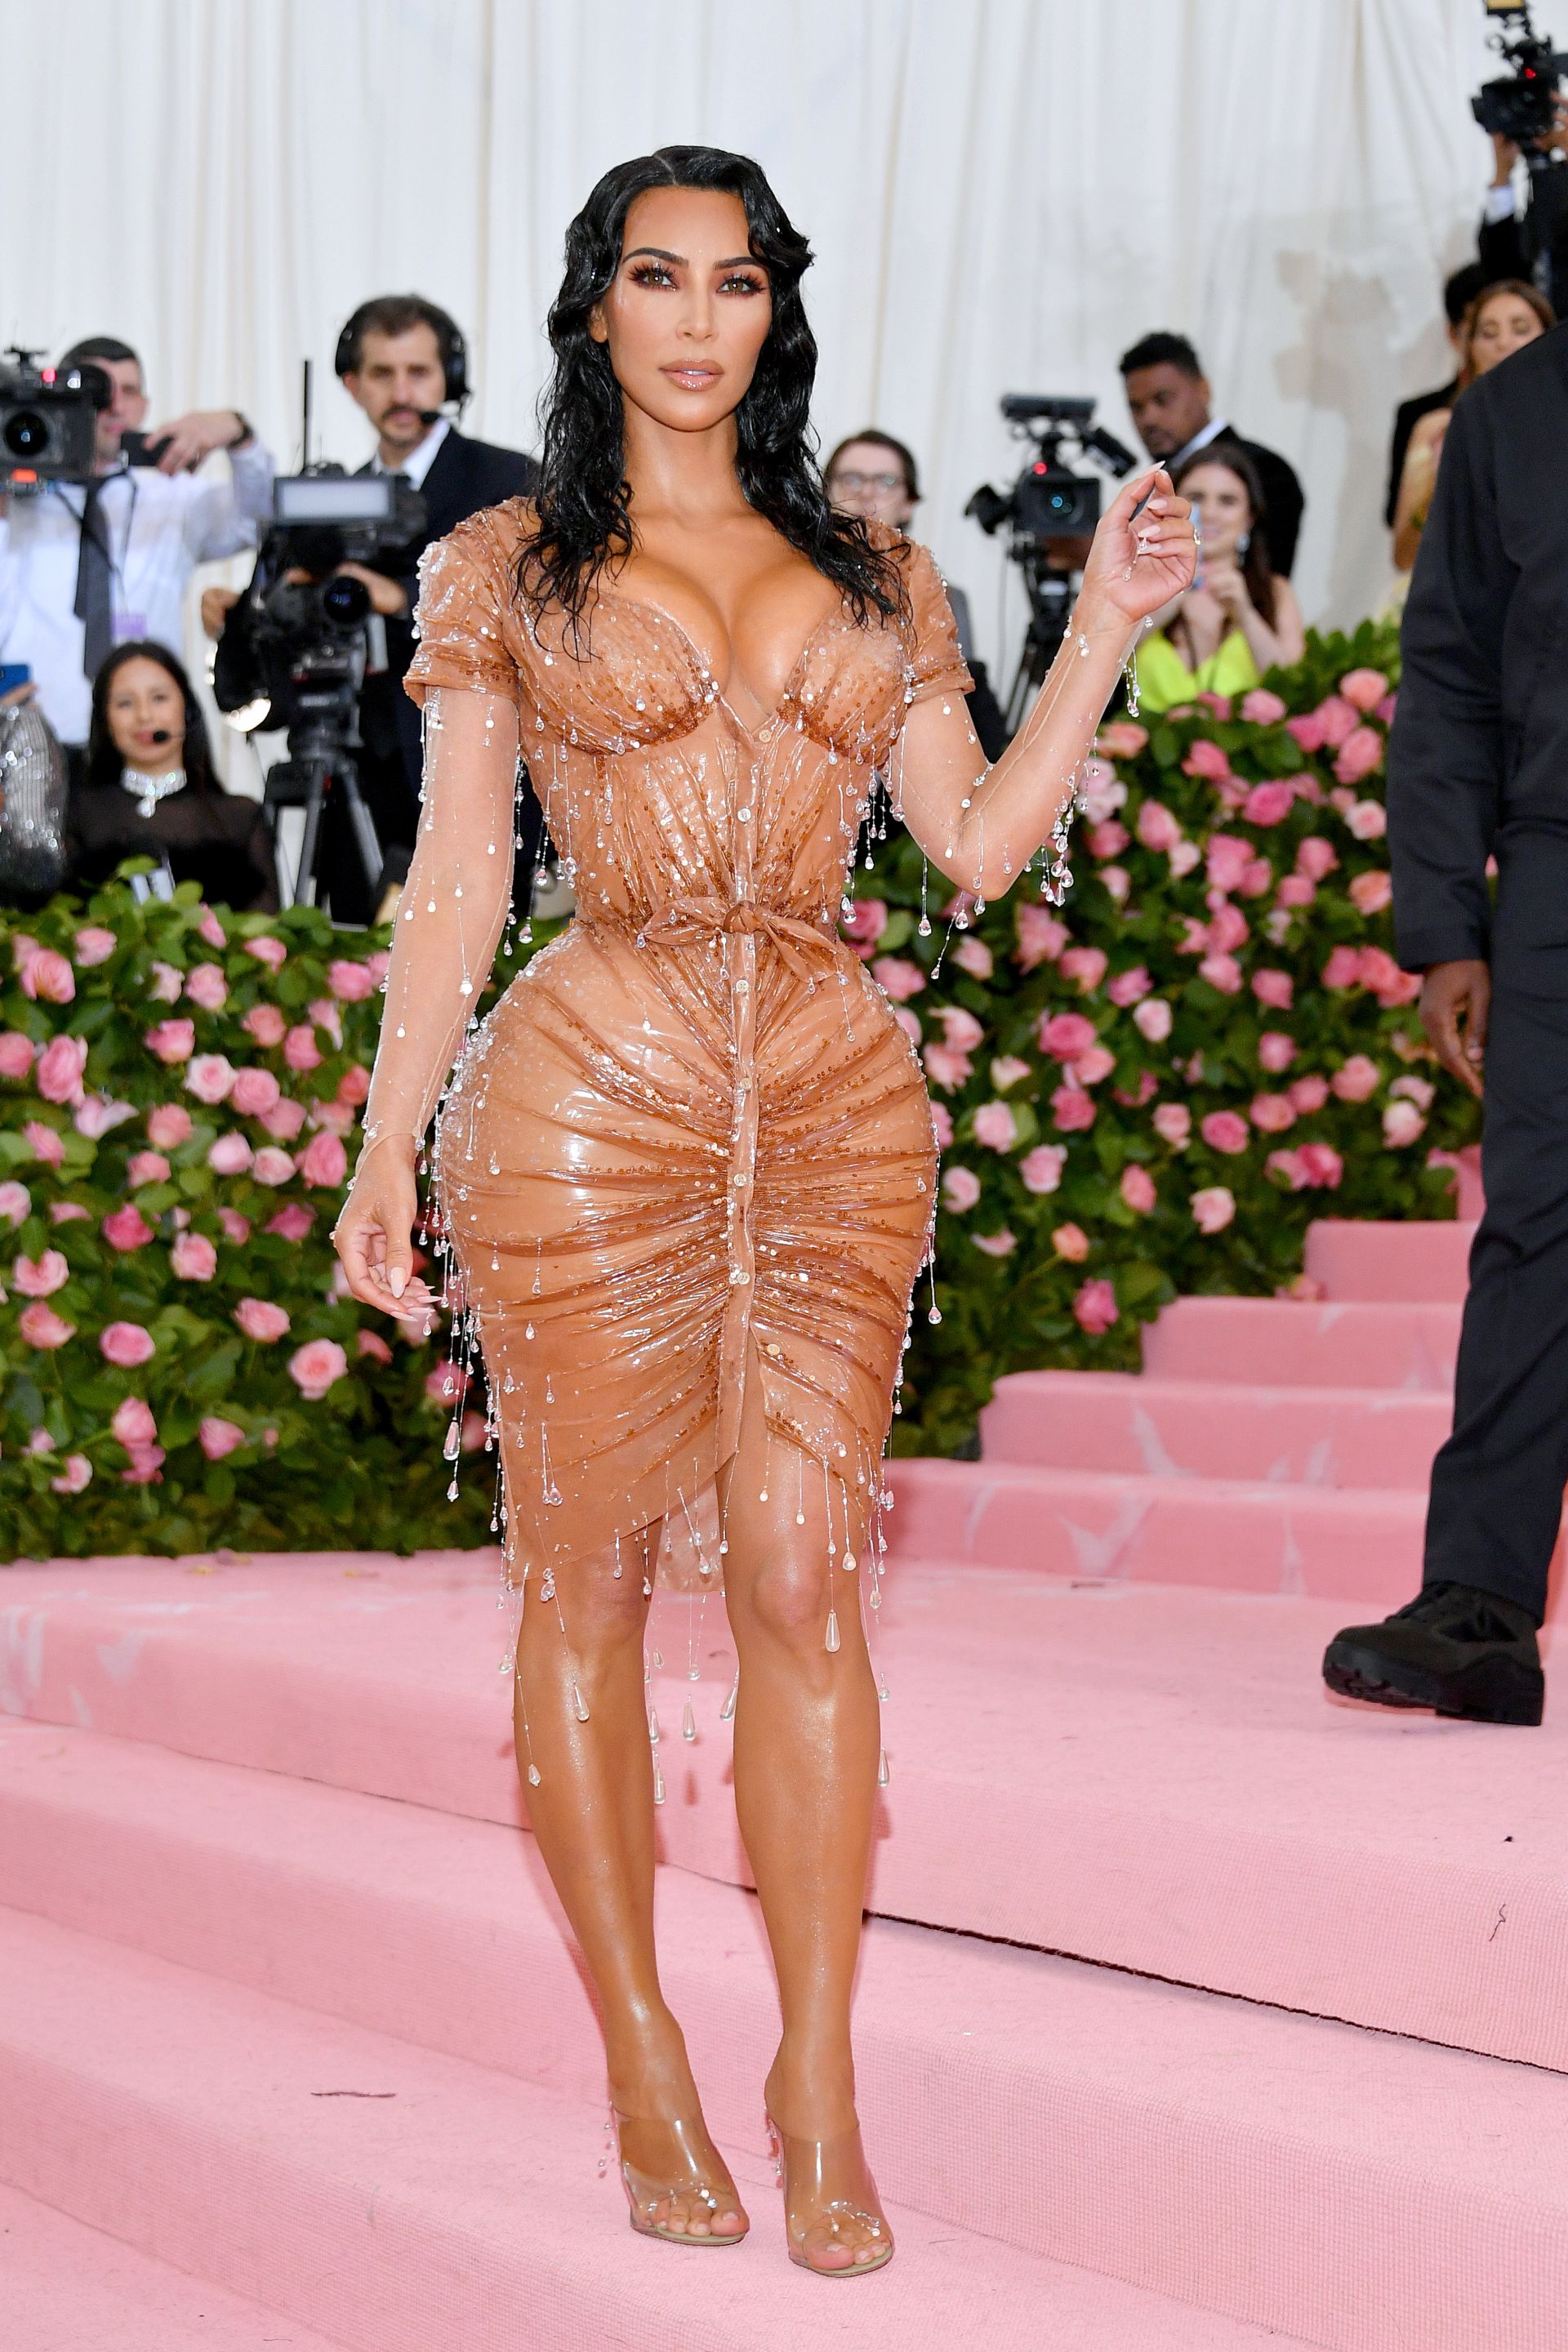 The most memorable Met Gala fashion moments that broke the